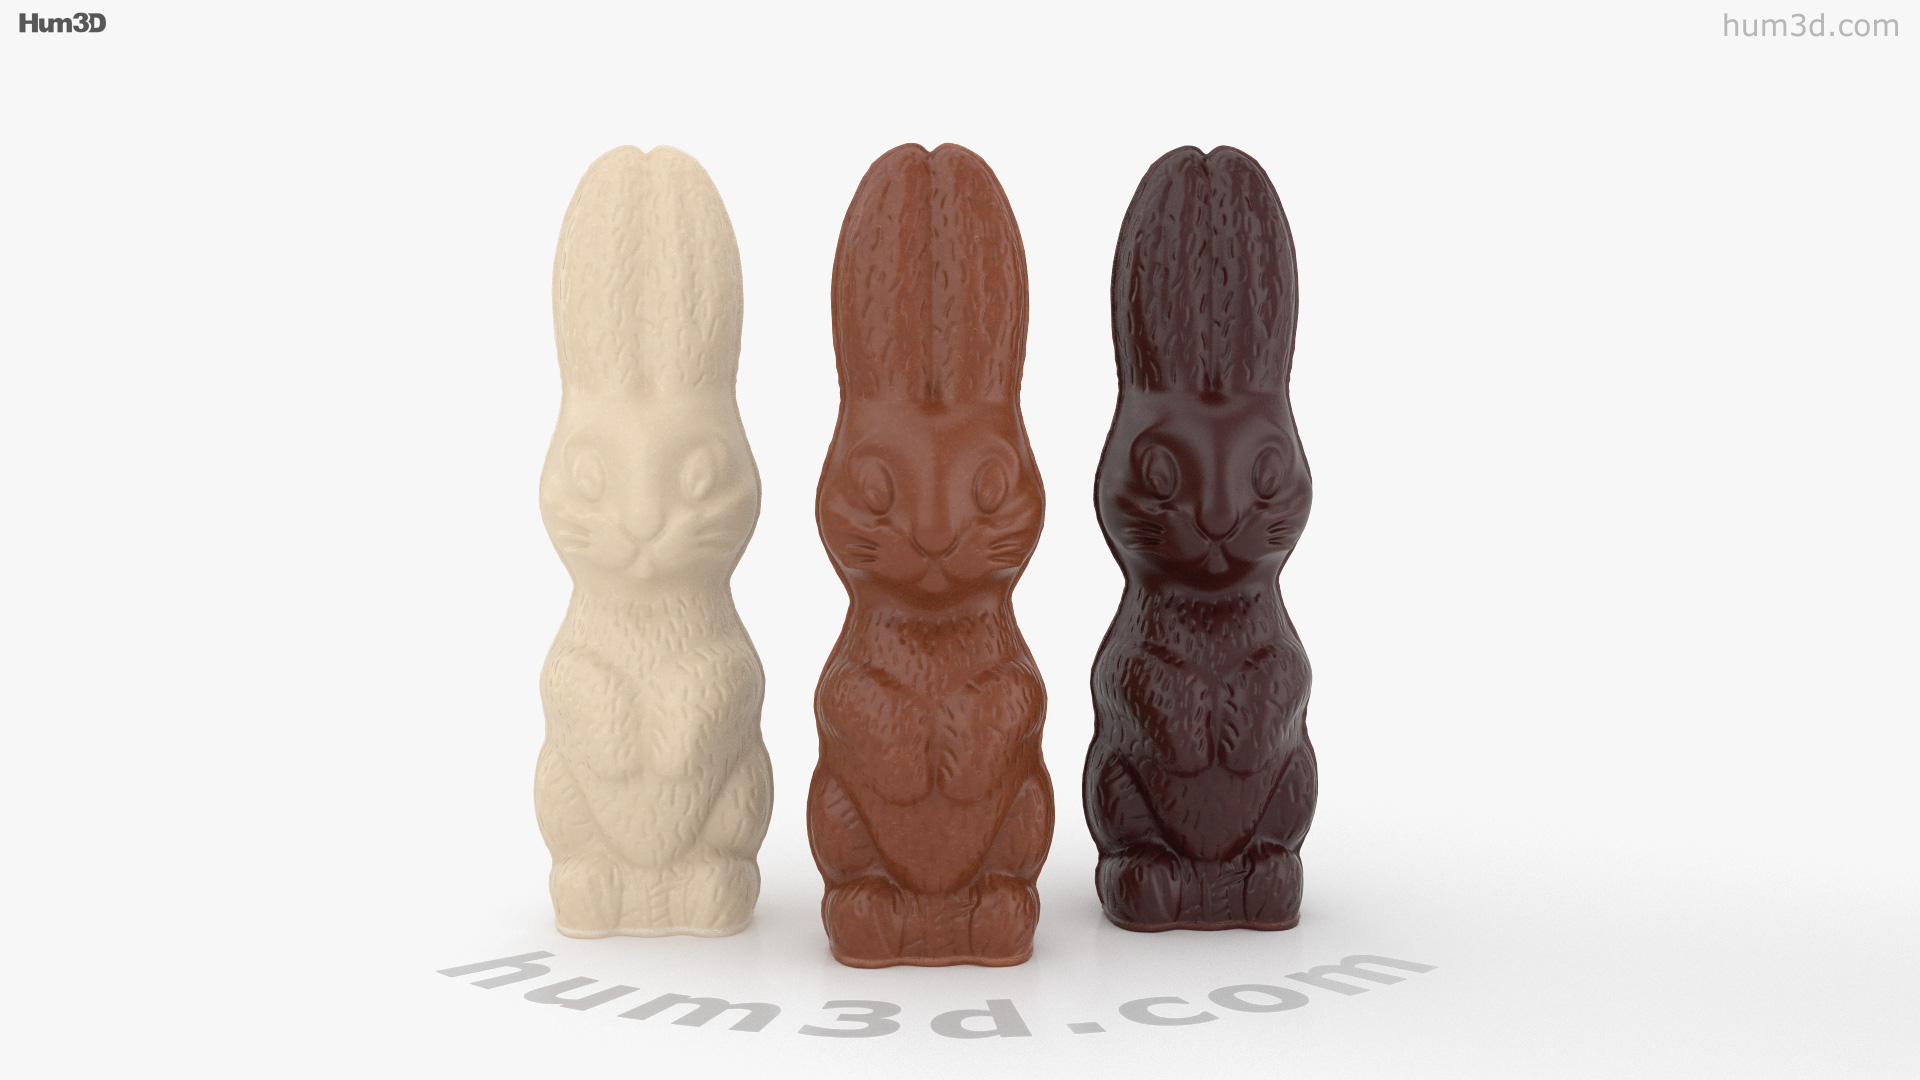 360 View Of Chocolate Bunnies 3d Model Hum3d Store